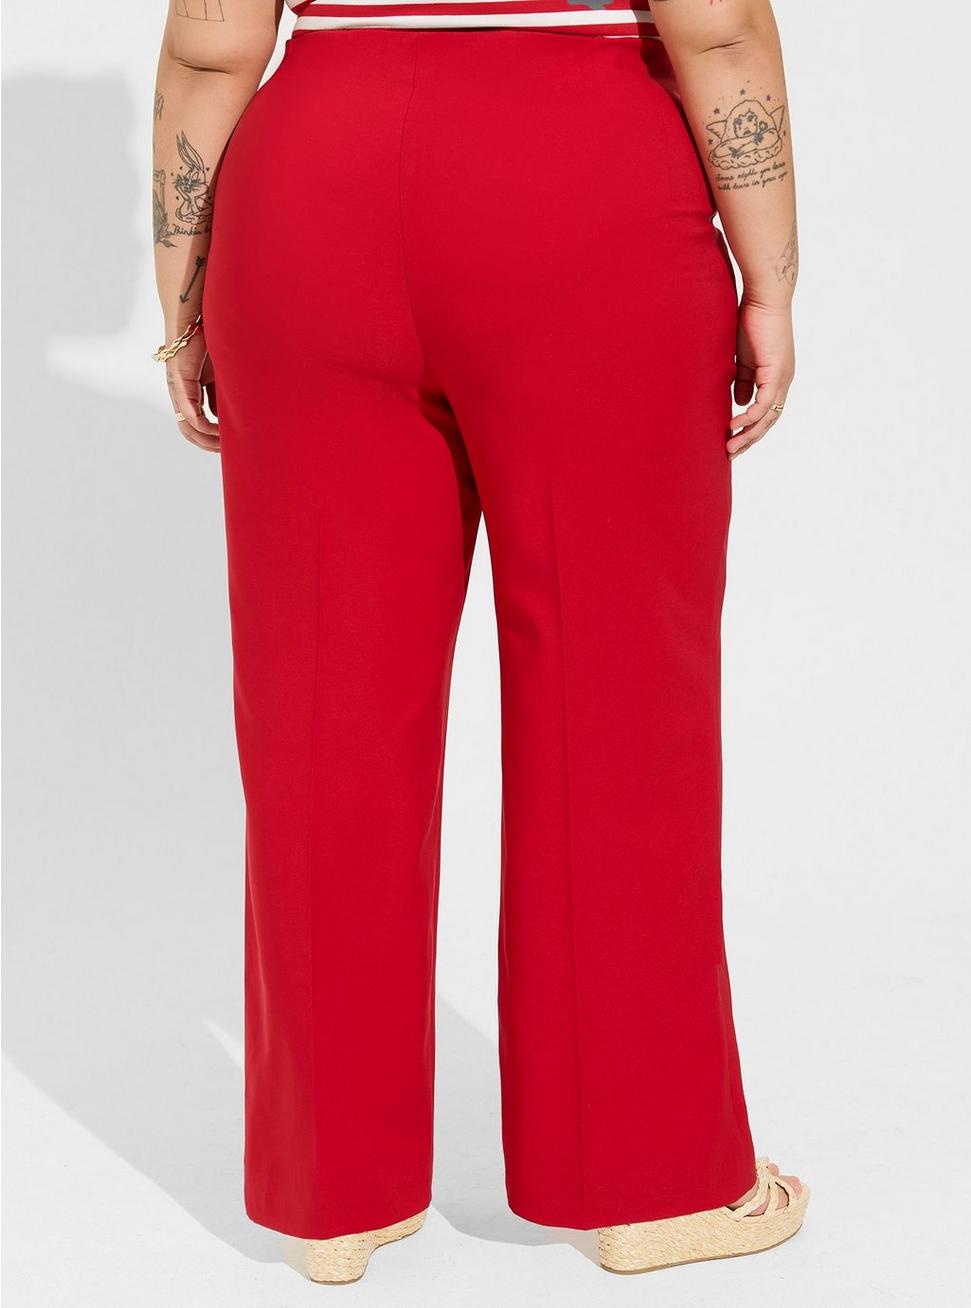 Retro Chic Pull-On Wide Leg Studio Refined Crepe High-Rise Nautical Pant, JESTER RED, alternate